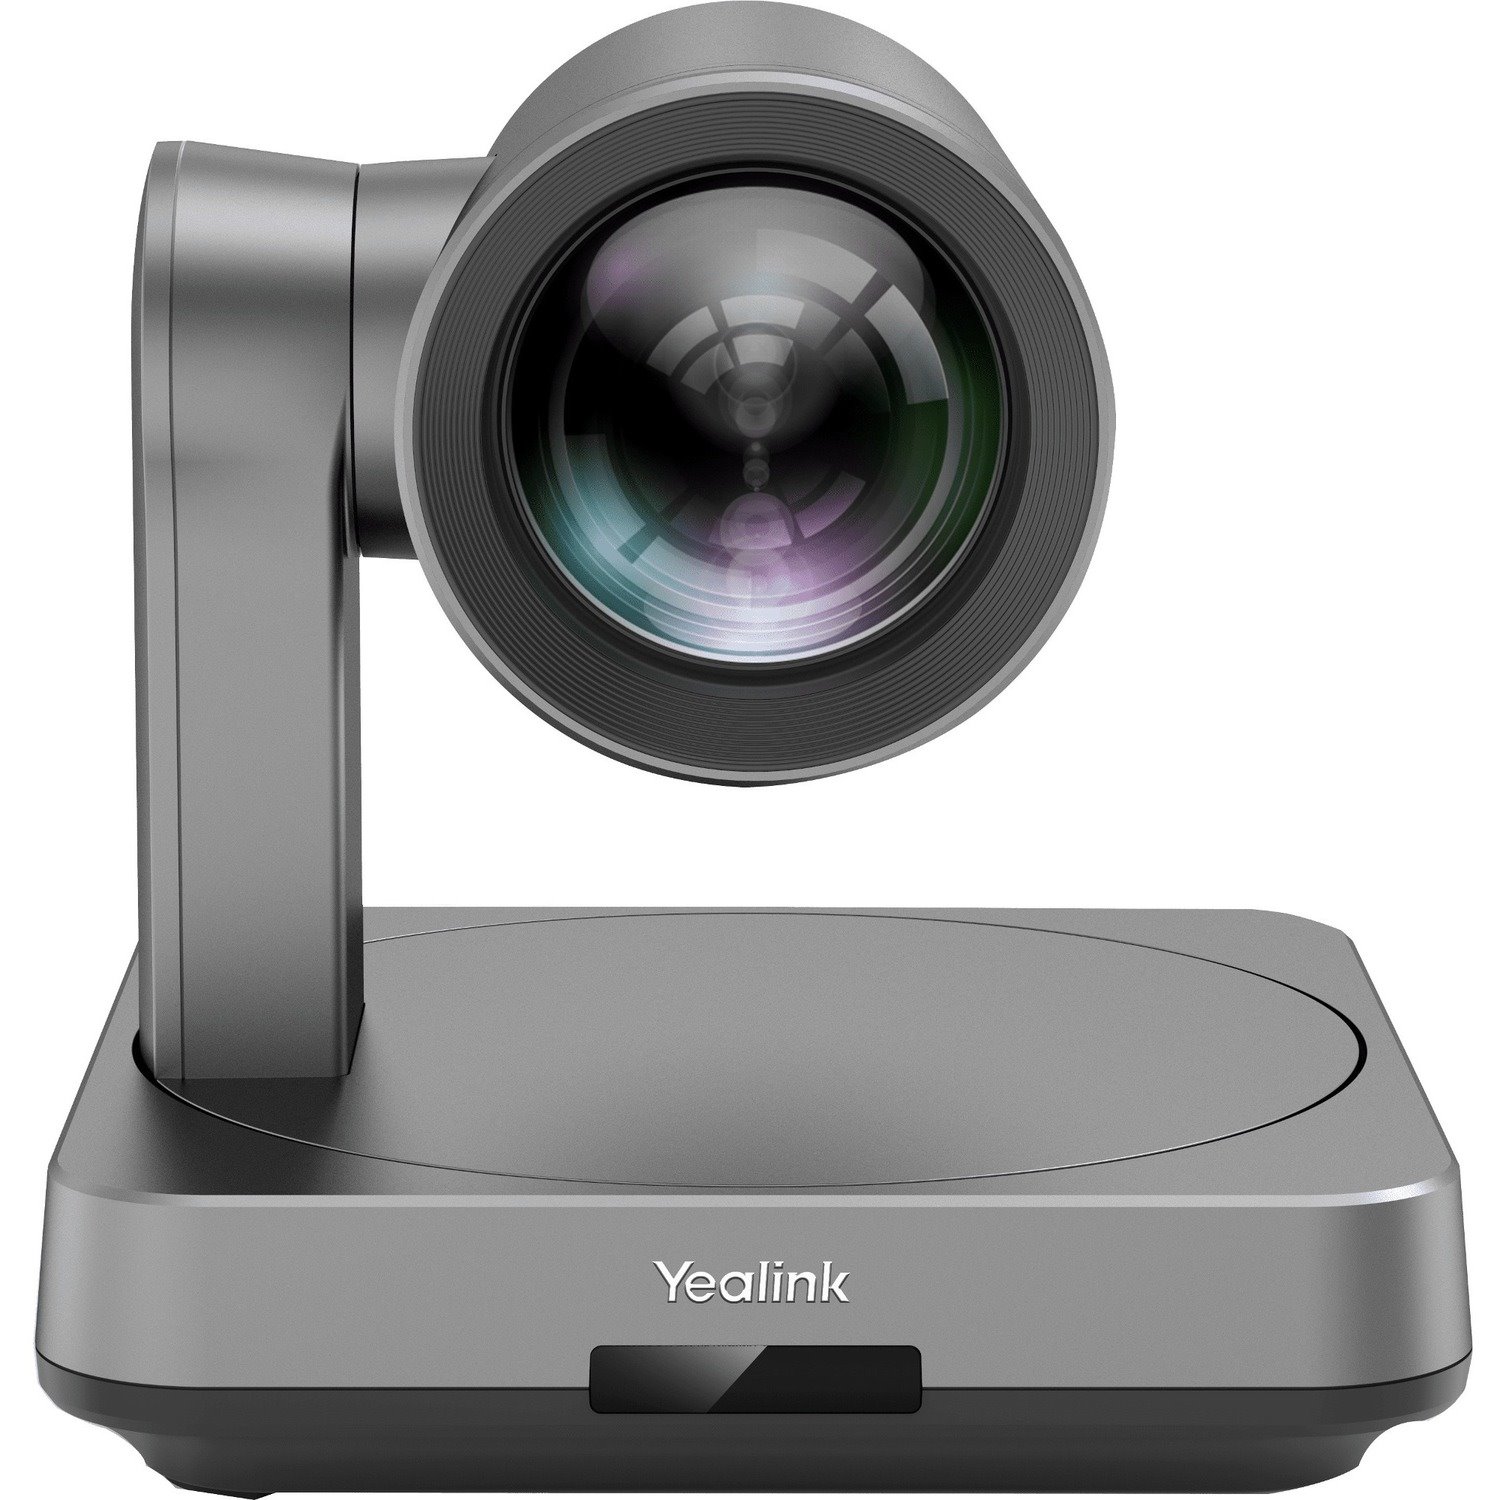 Yealink UVC84 BYOD Teams Video Conference Kit For Large Rooms